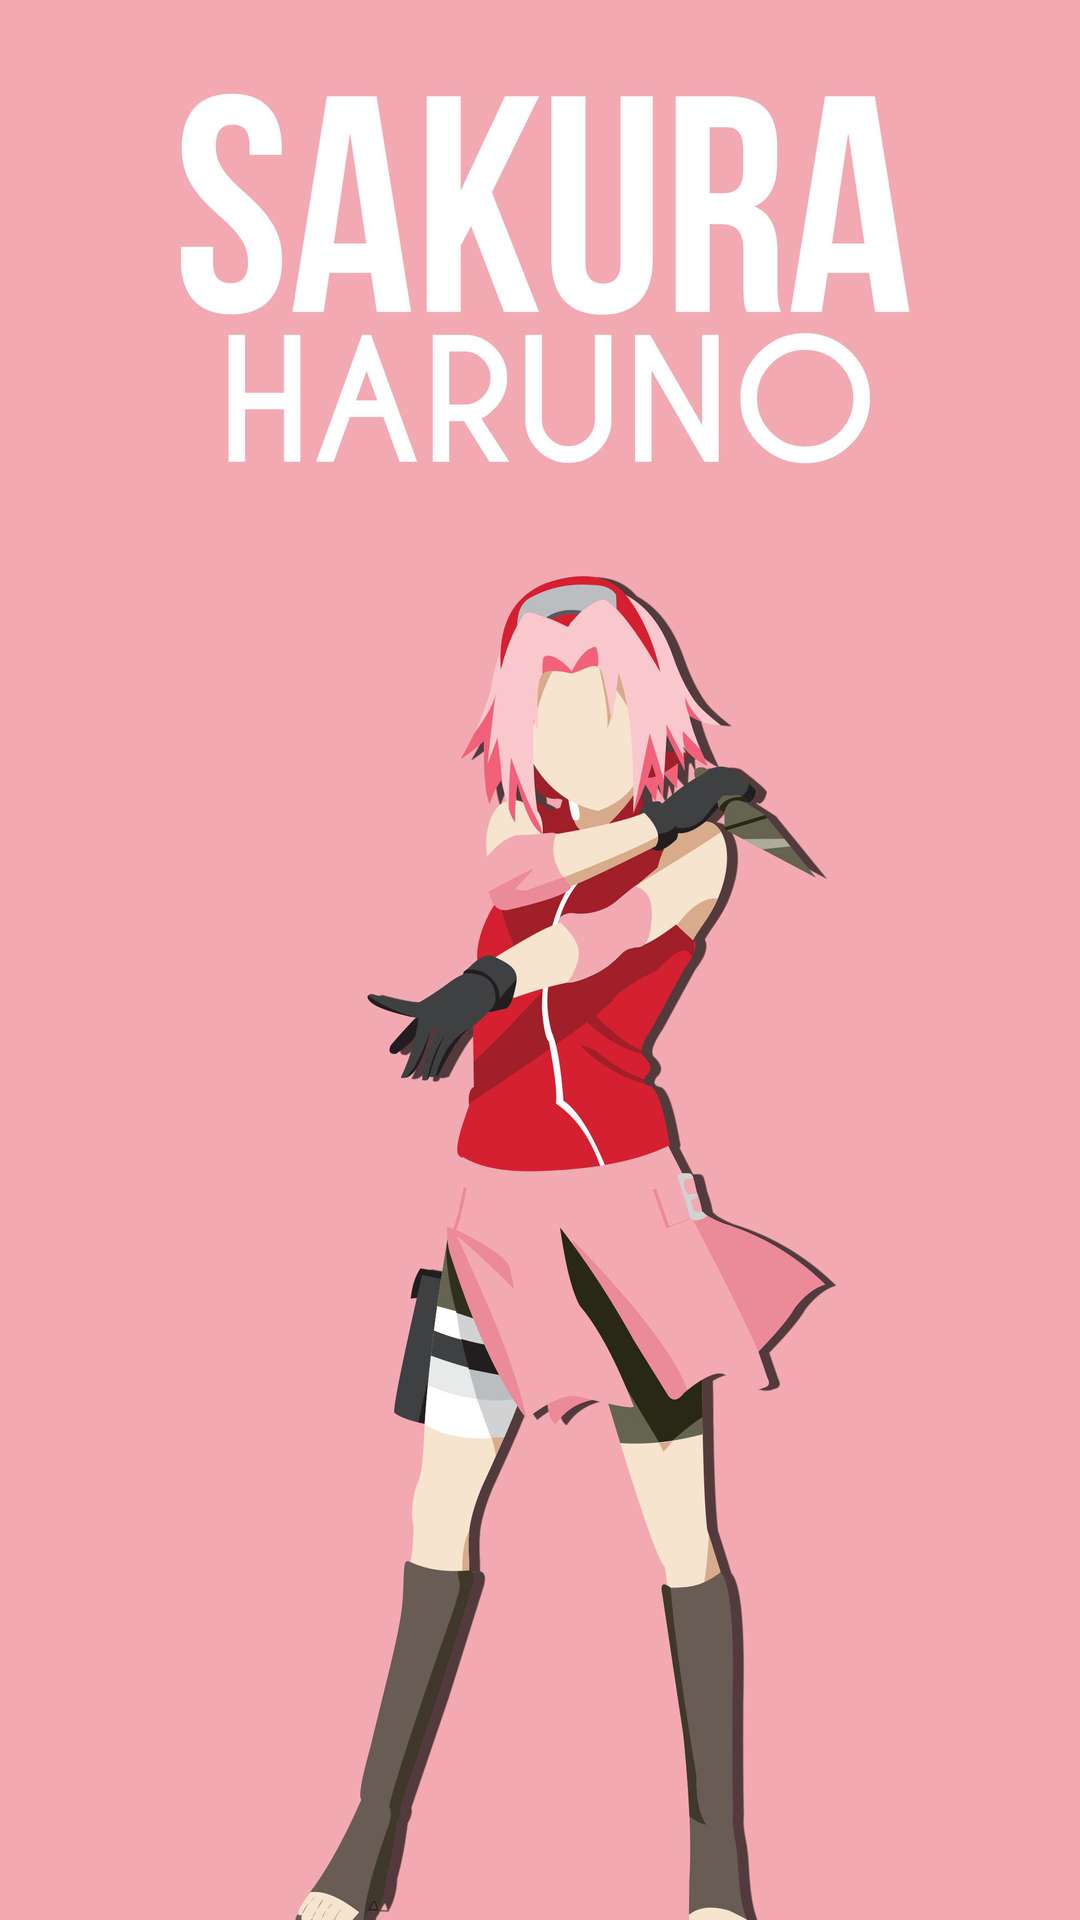 10+ Sakura Haruno Wallpapers for iPhone and Android by Susan Sanchez